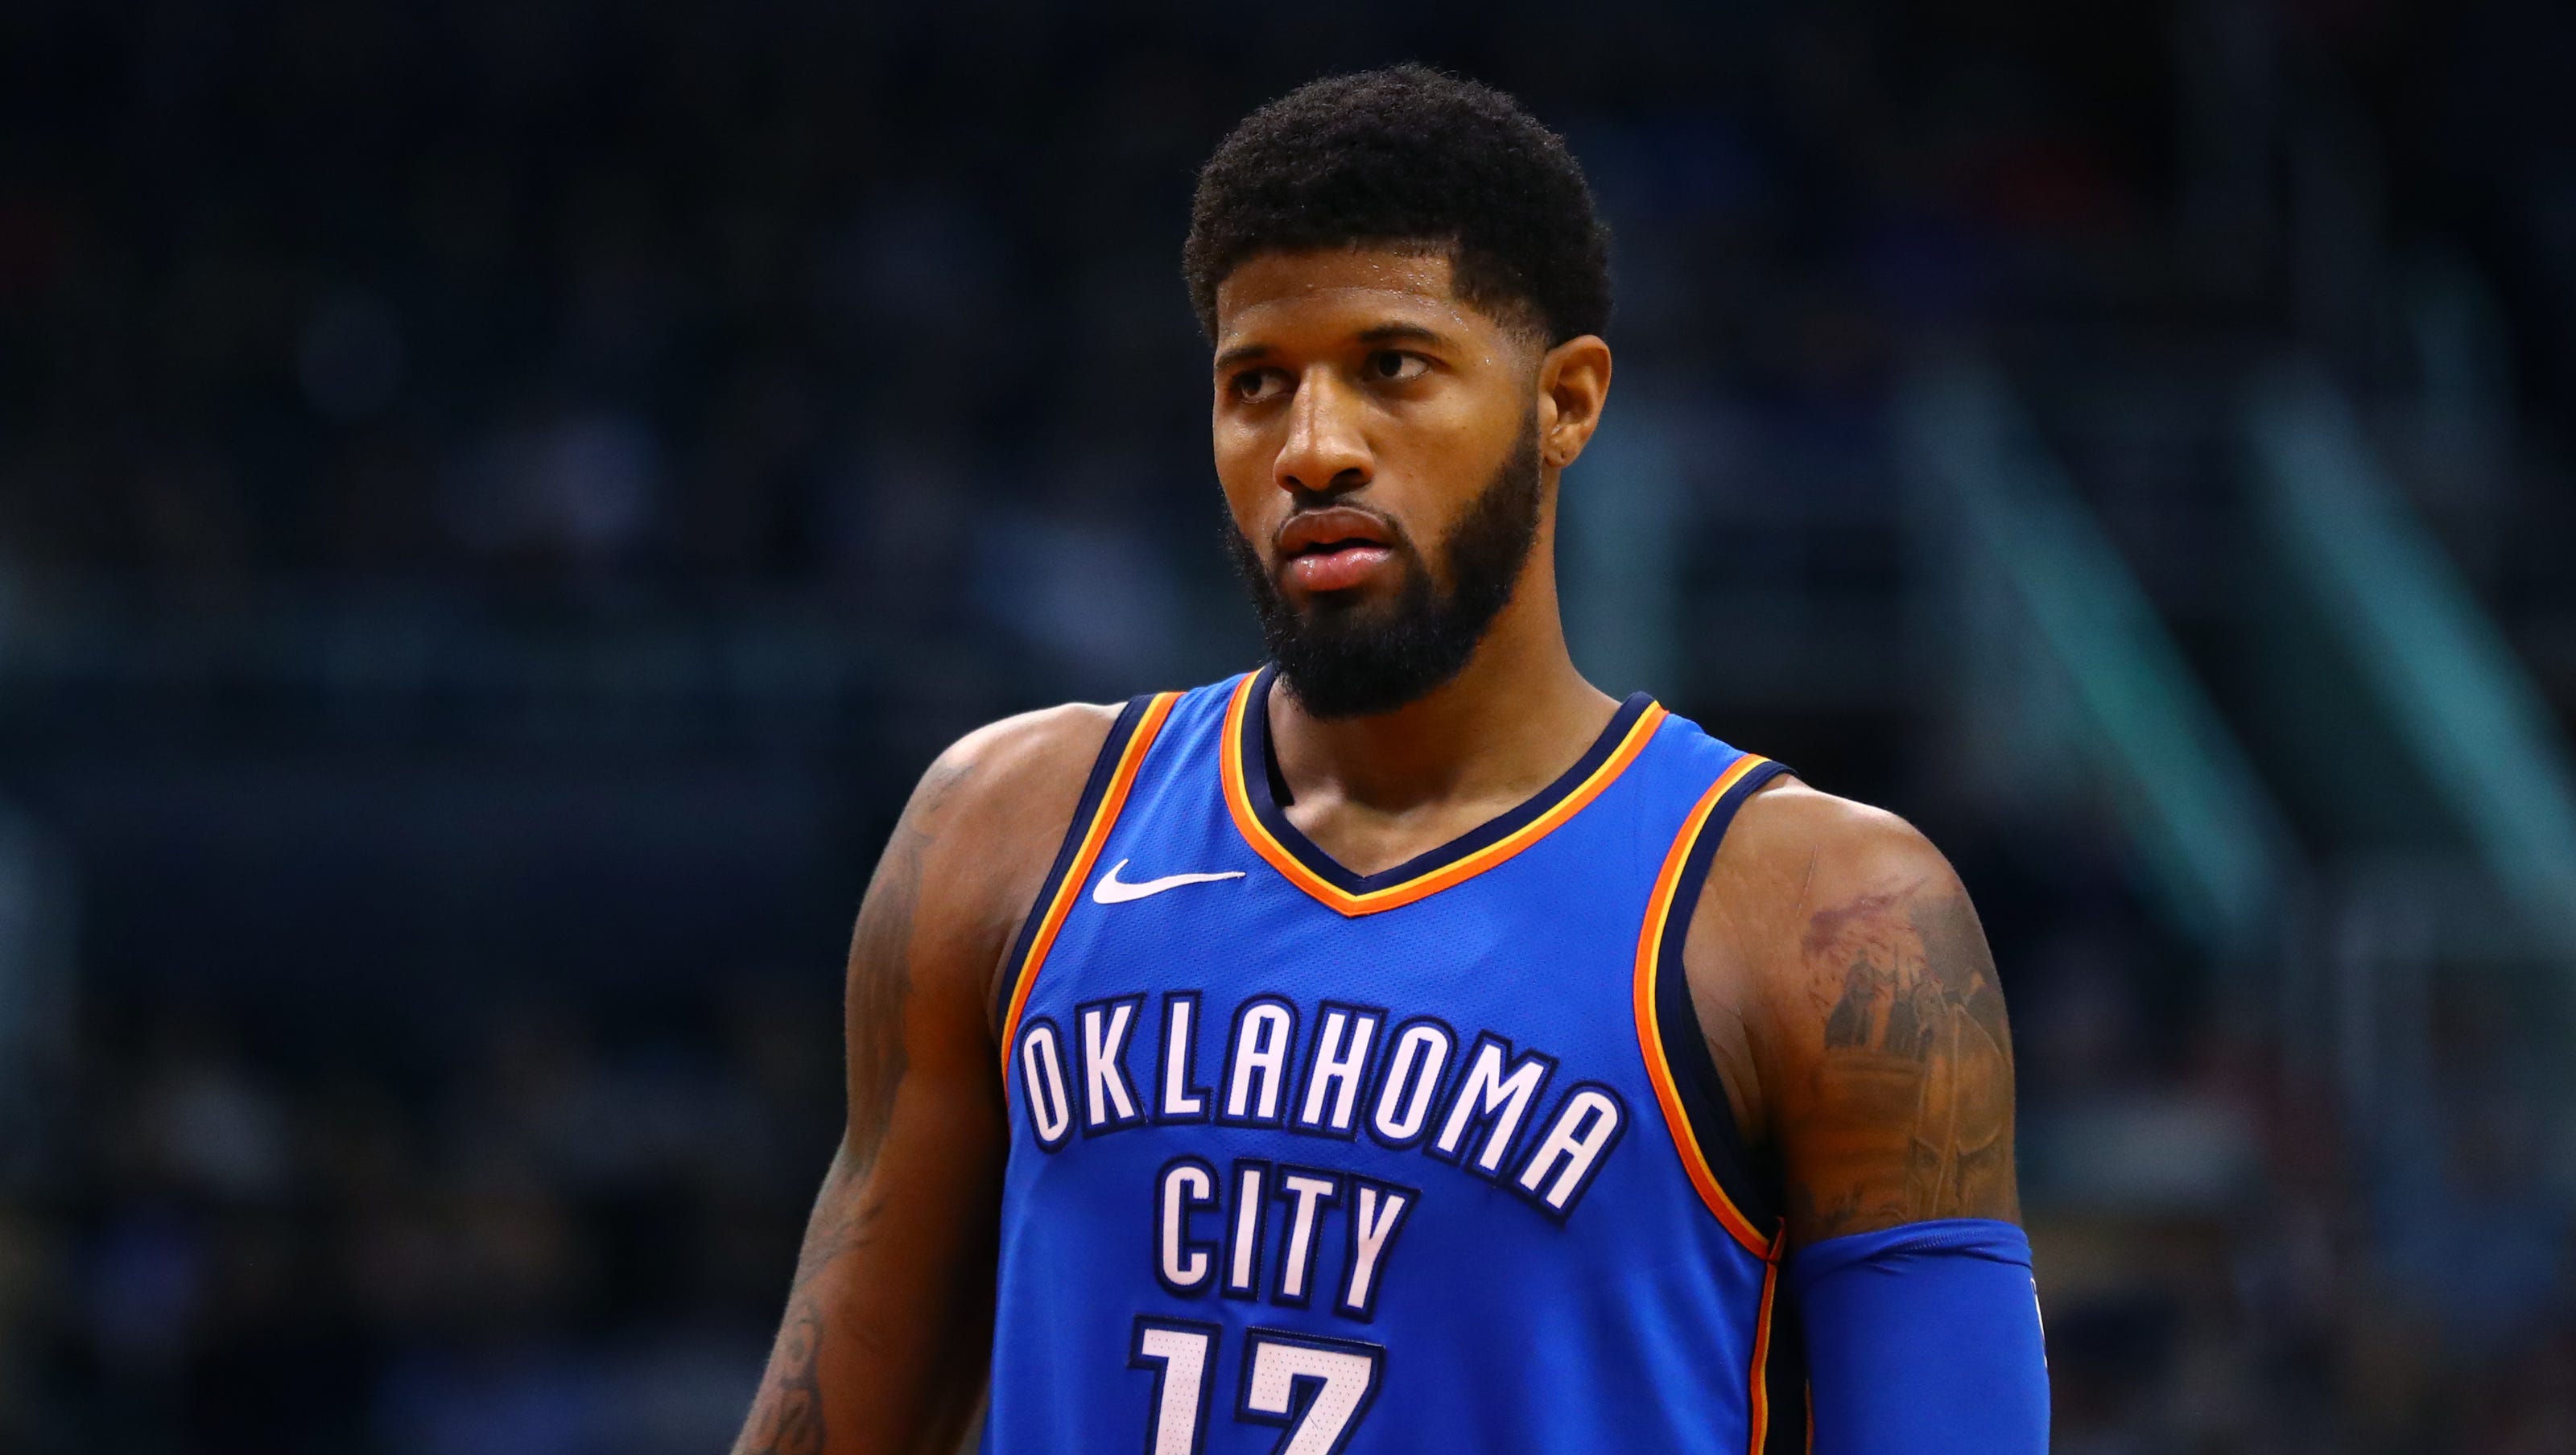 Paul George to opt out of contract with Oklahoma City Thunder